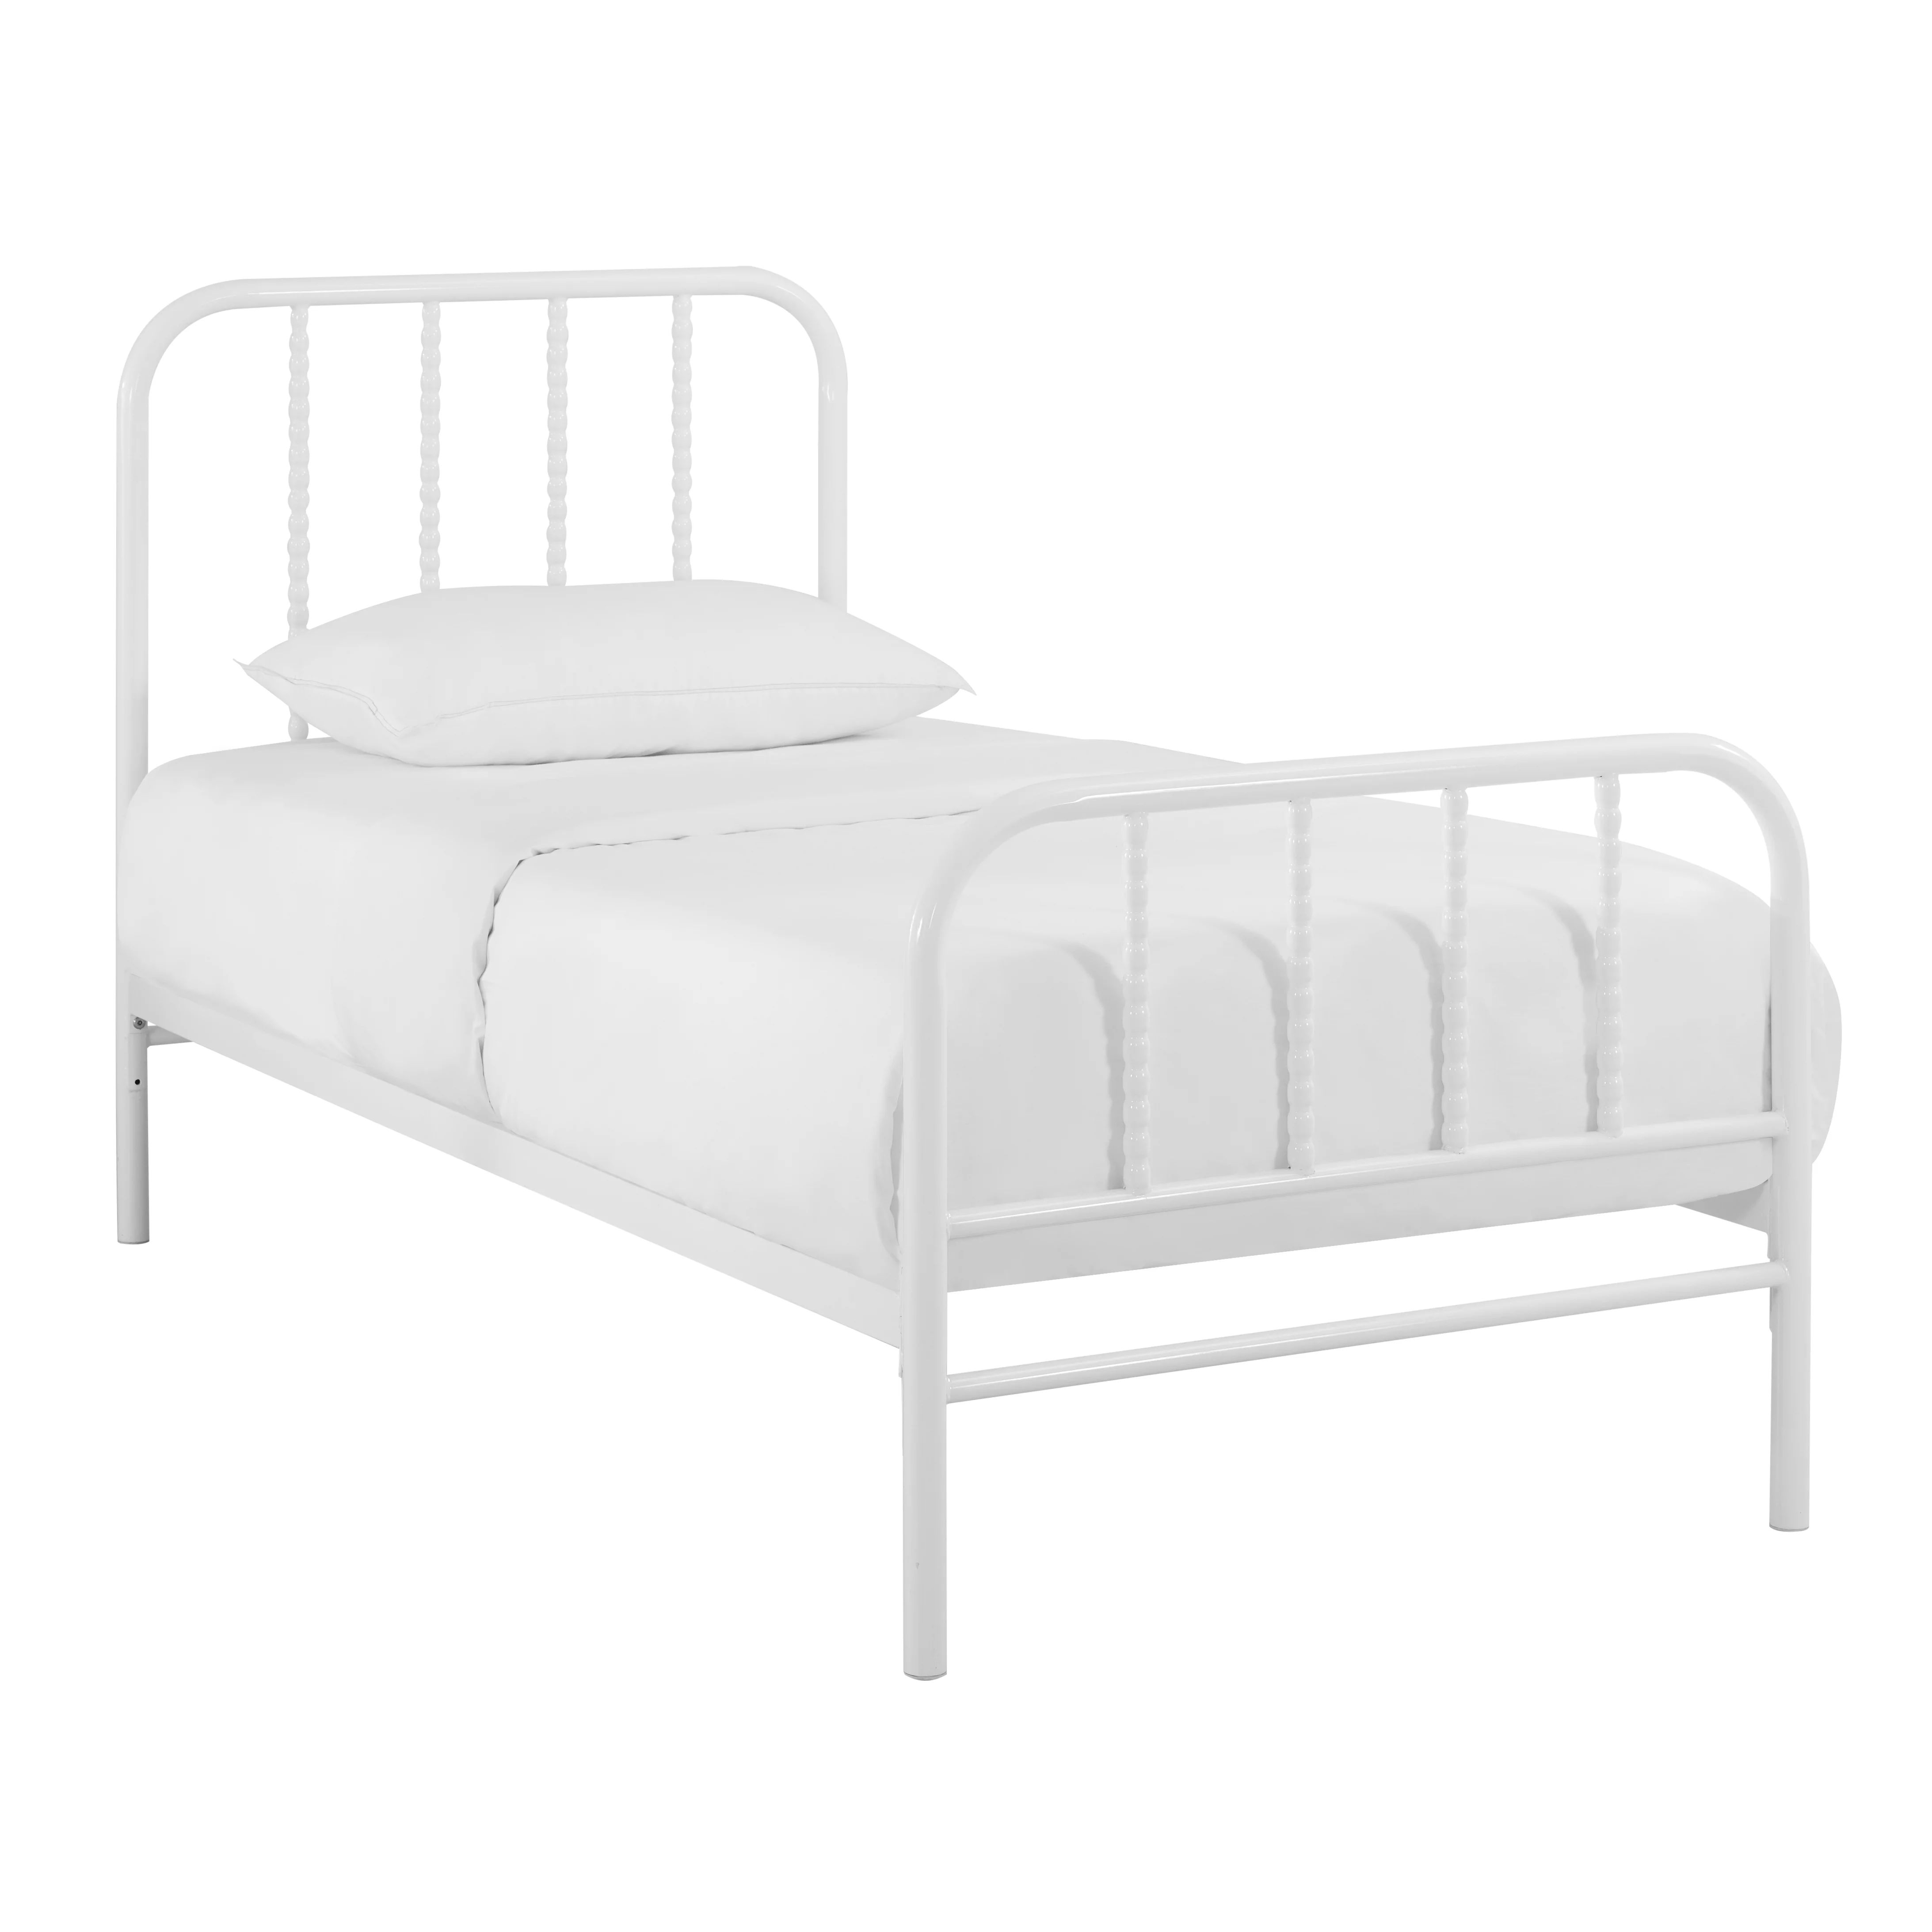 DHI Joanna Industrial Metal Platform Bed, Multiple Sizes and Colors | Walmart (US)